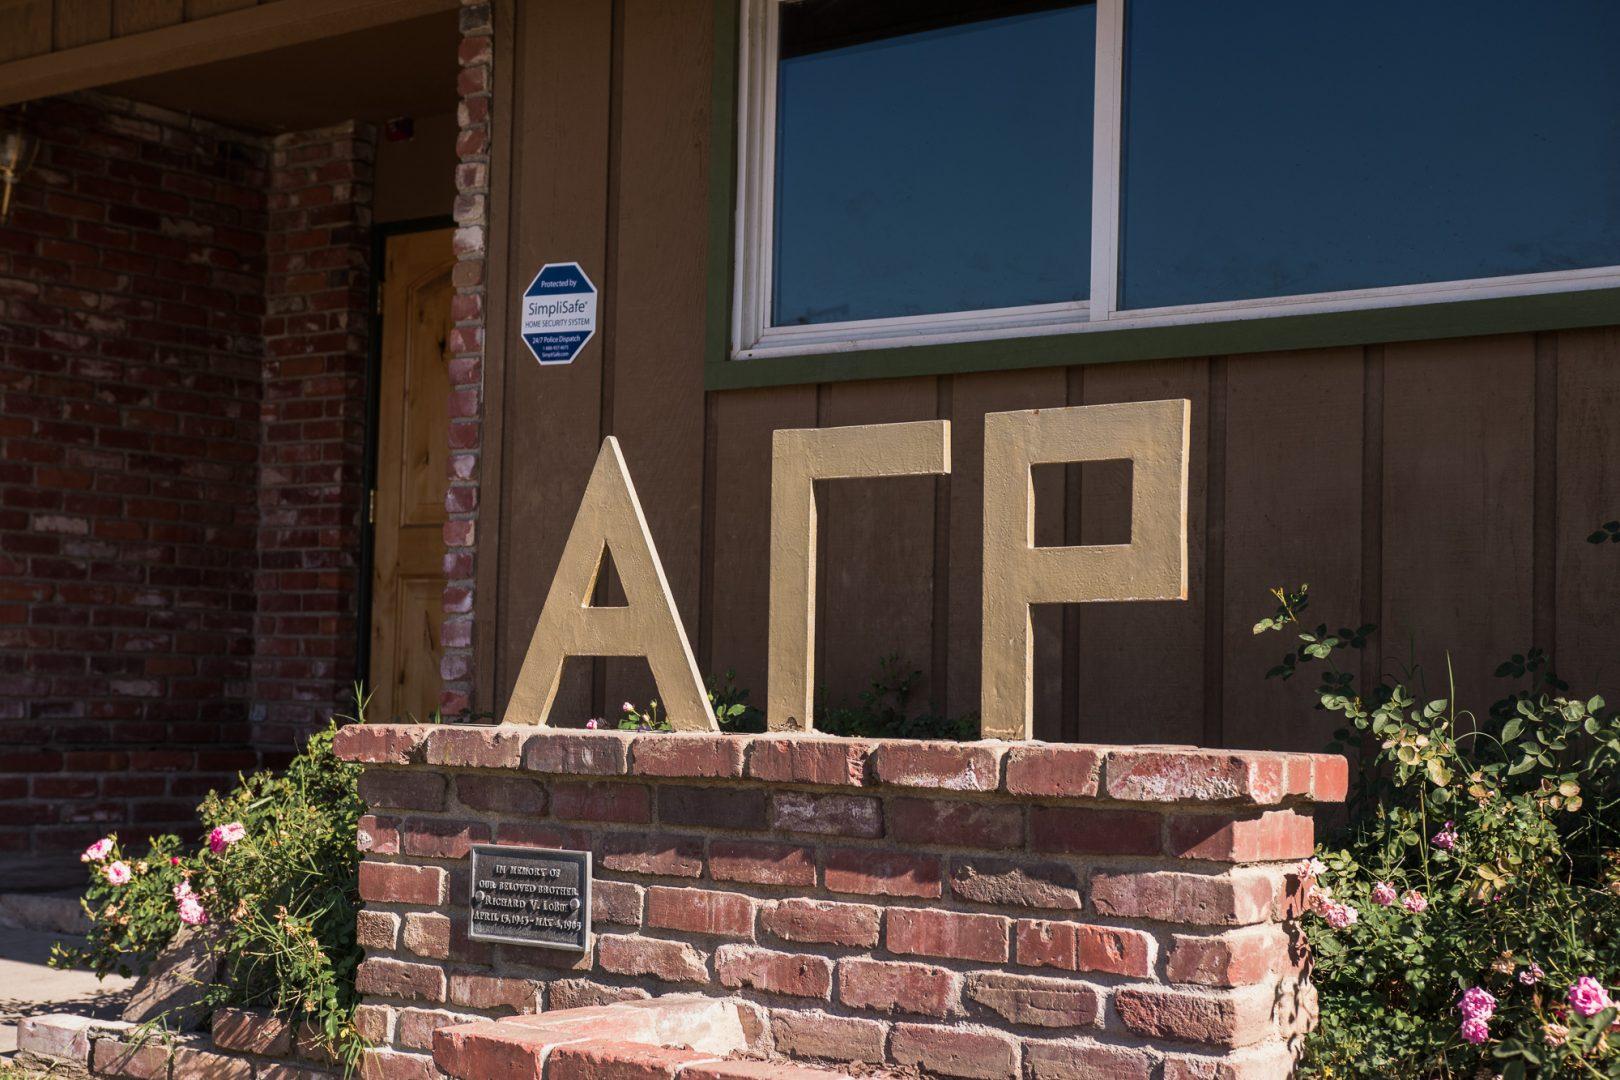 The Alpha Gamma Rho house, home of the newly-recognized fraternity after being suspended in 2015 for allegations of hazing and providing alcohol to minors. (Alejandro Soto/The Collegian)